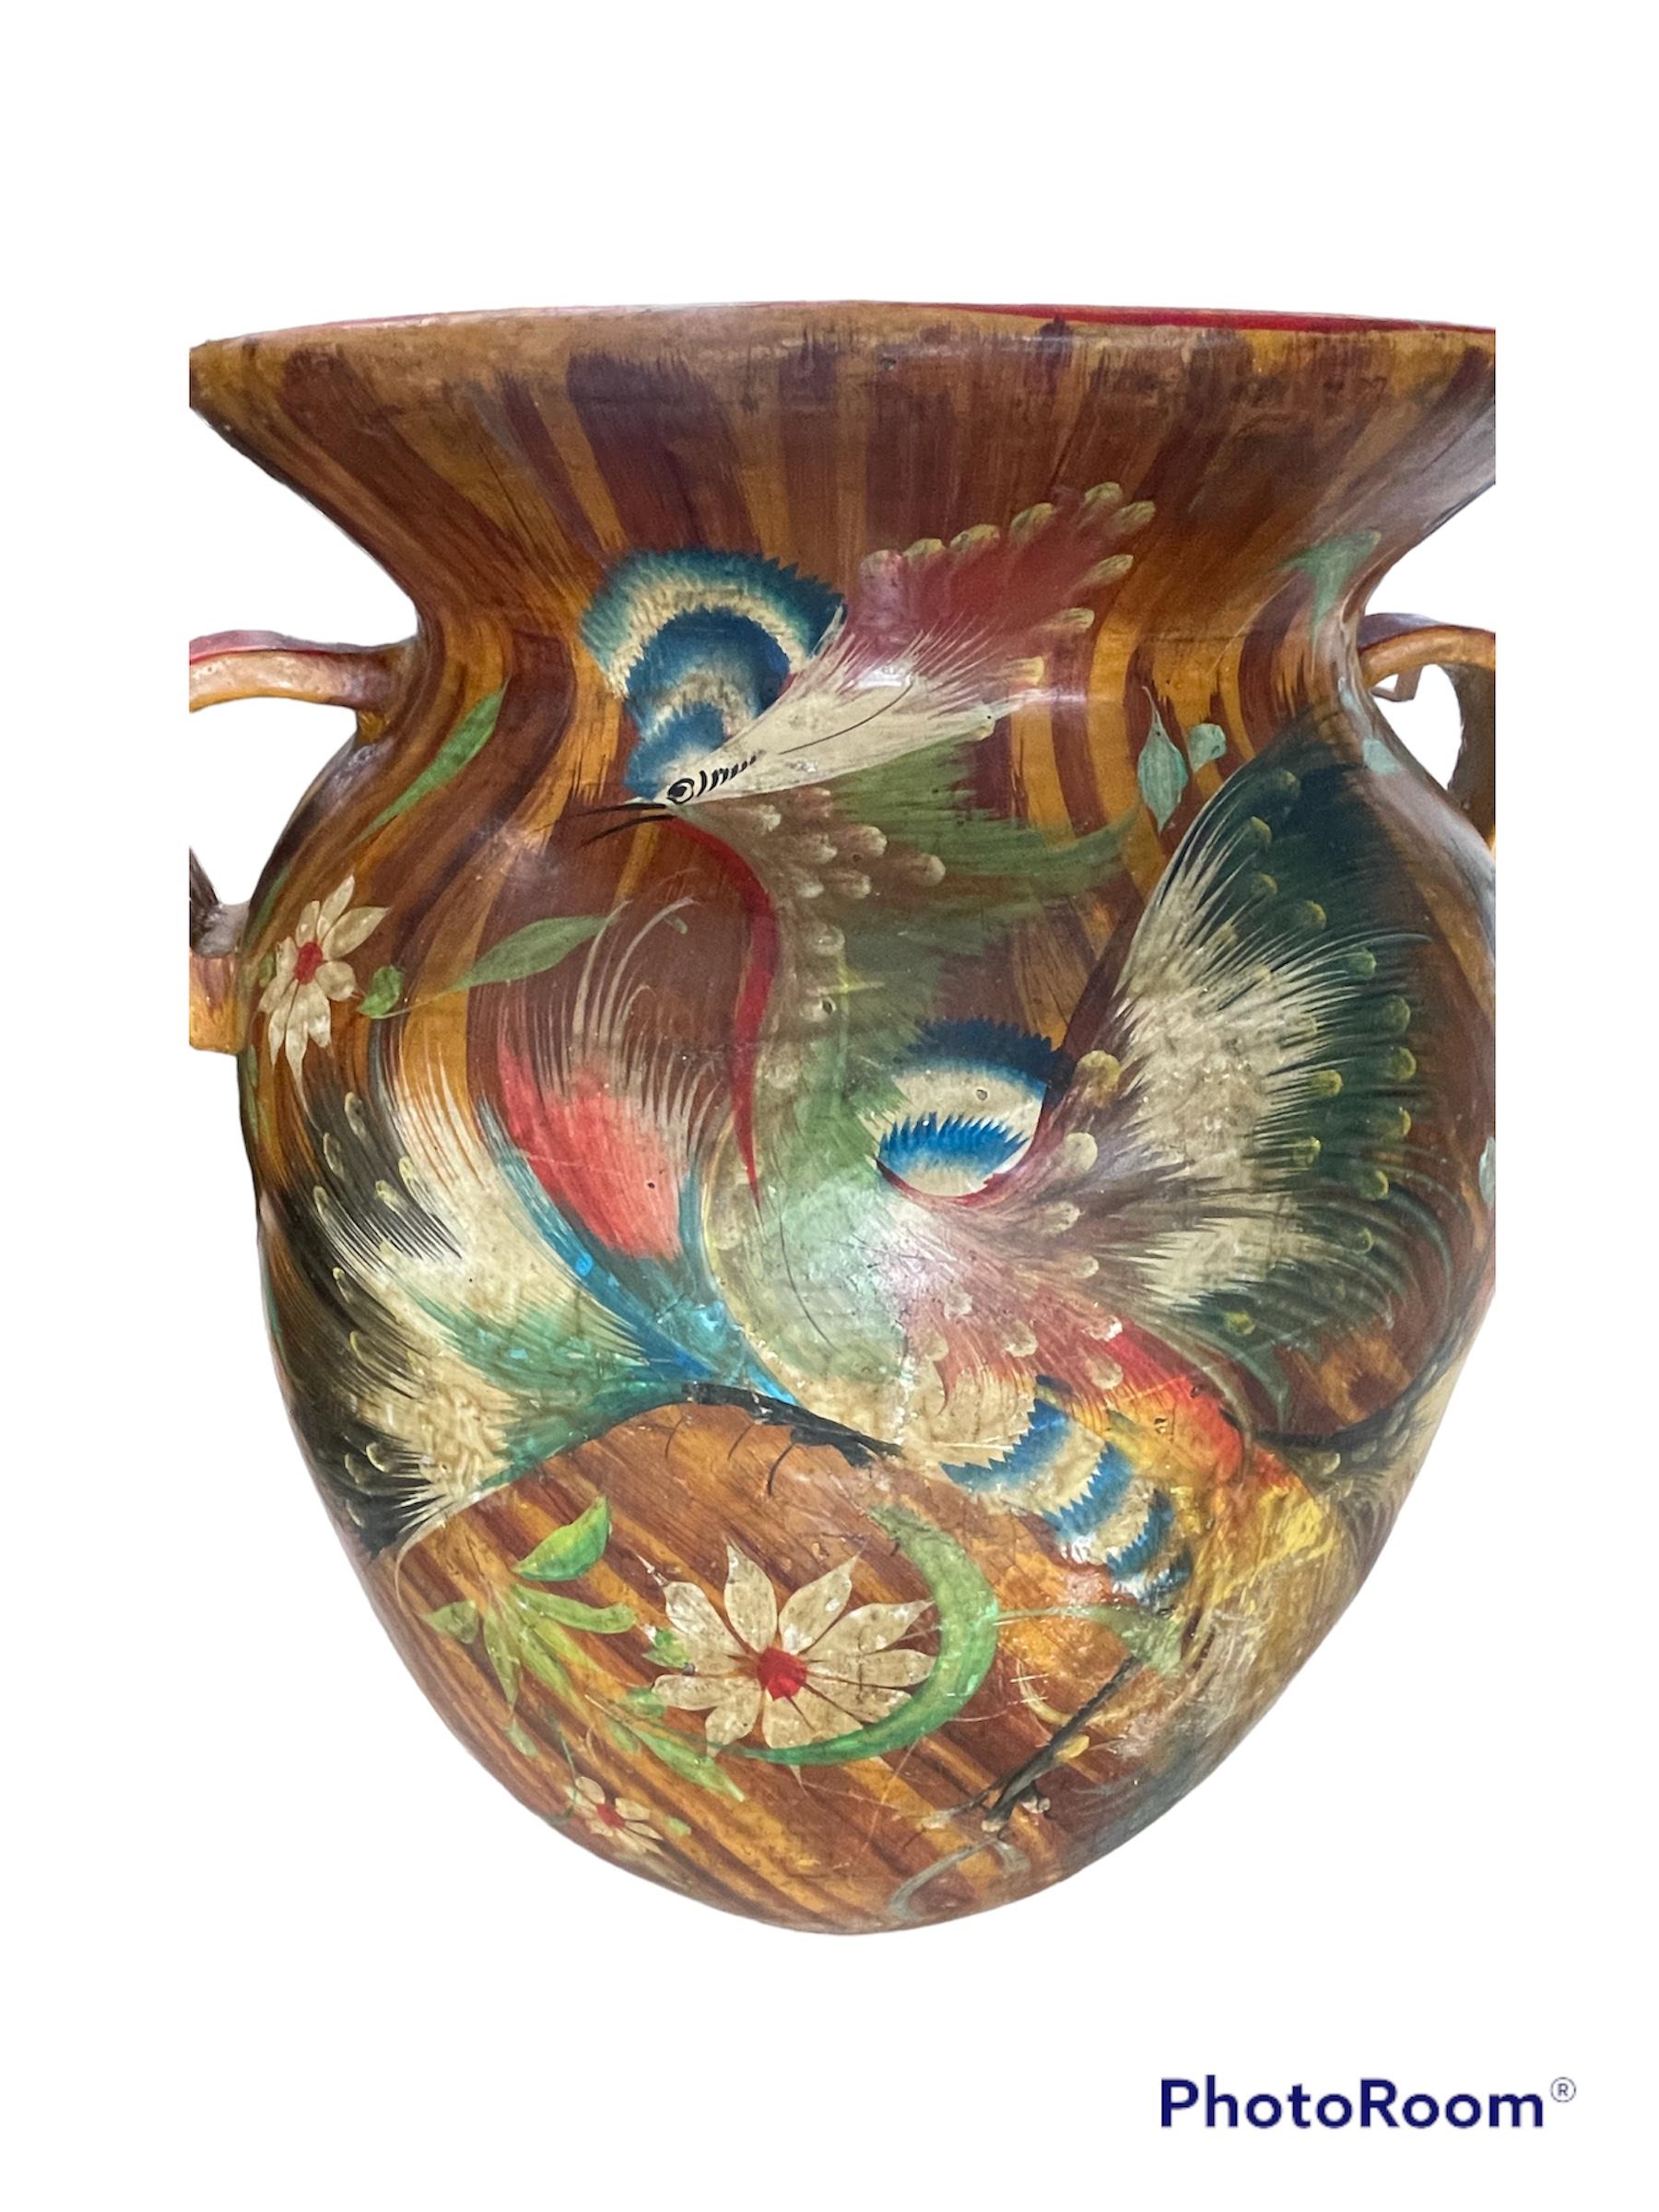 Beautiful vases made in Mexico by incredible artists from the city of Guadalajara.